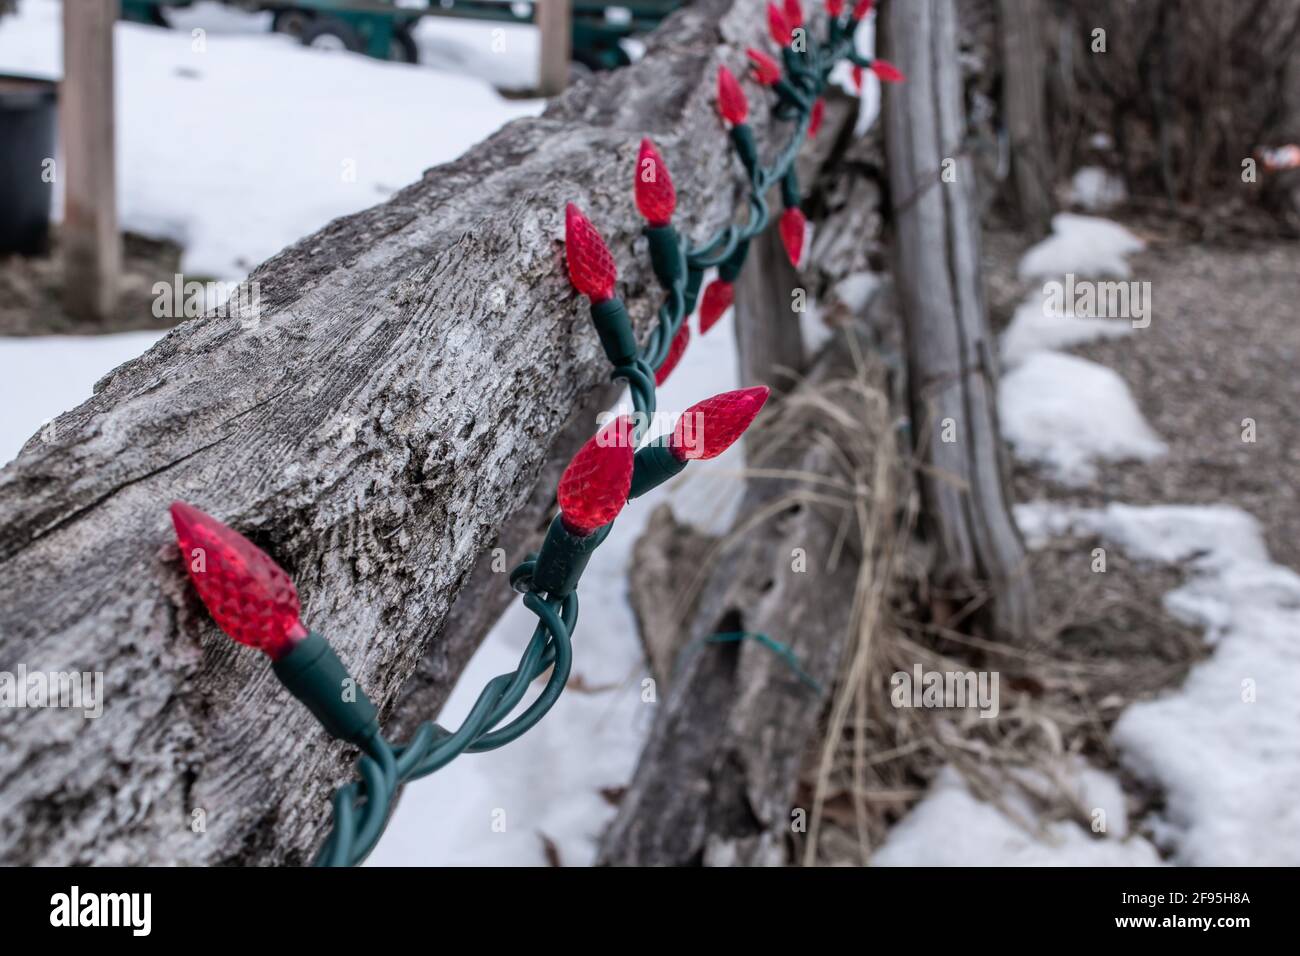 A tangle of red Christmas light bulbs unlit on an old rickety wooden fence in London Canada. Rustic holiday-themed decorations for the season. Stock Photo